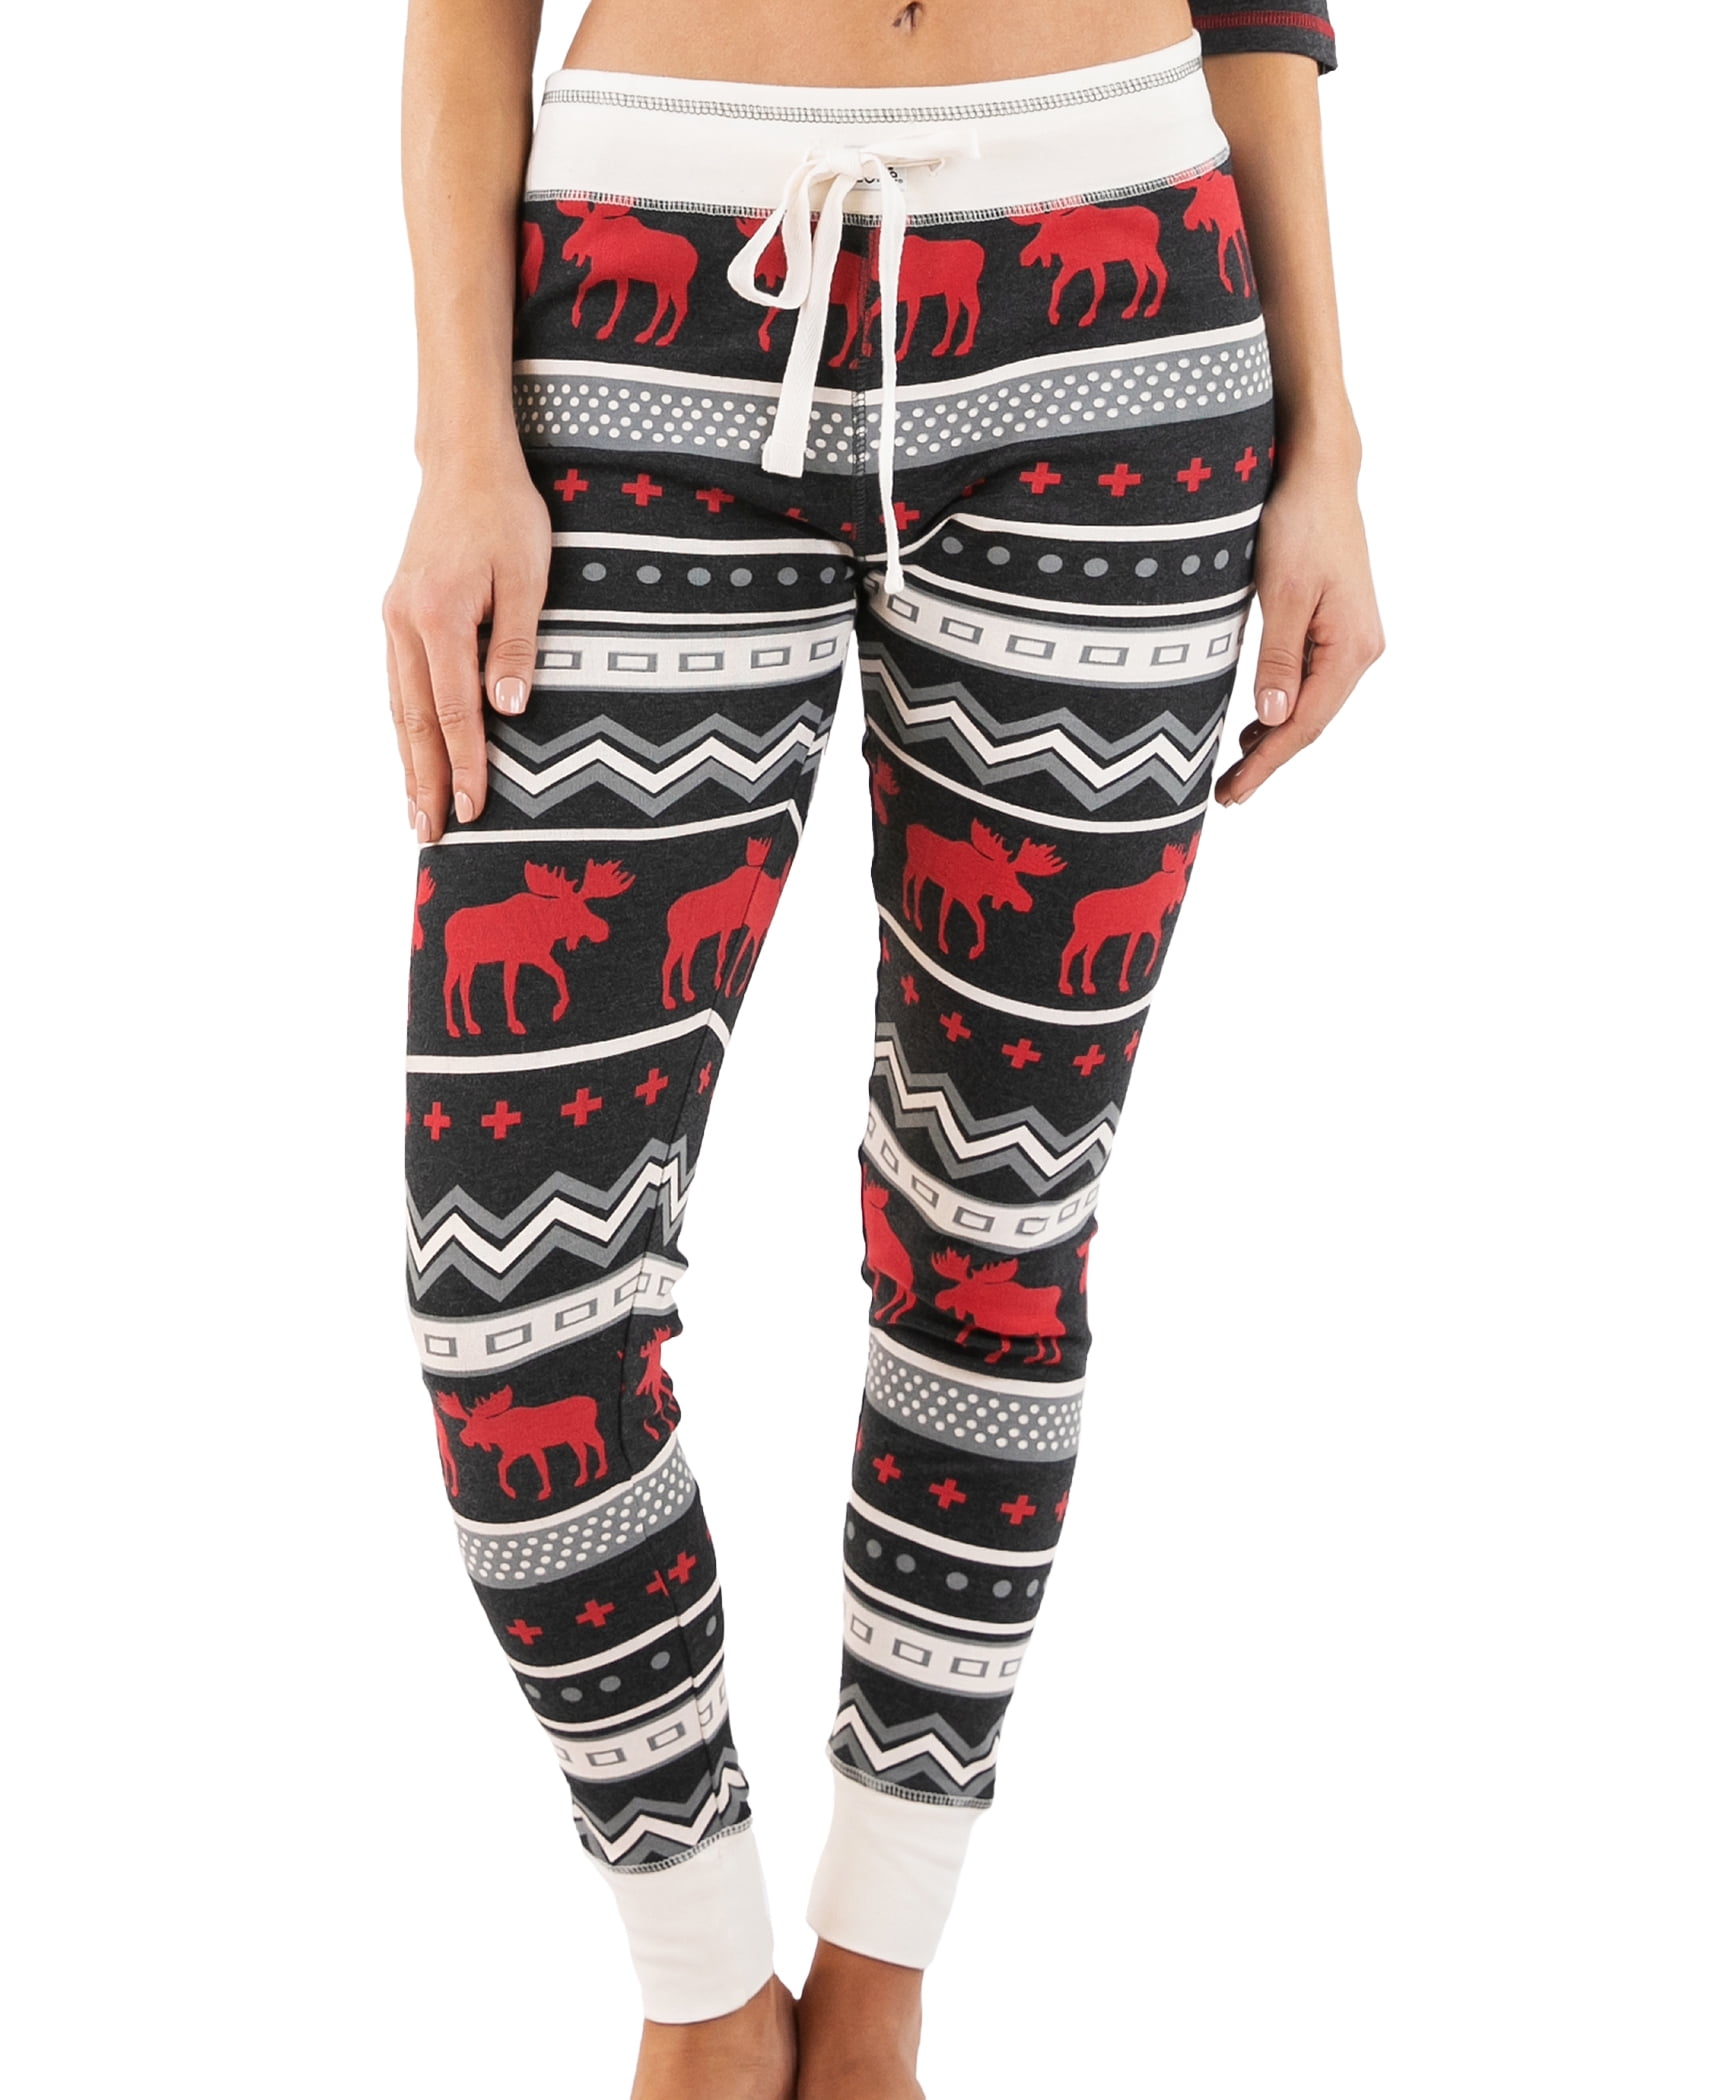 Candy Cane Women's Leggings and Tees, Pajama Separates, Cozy